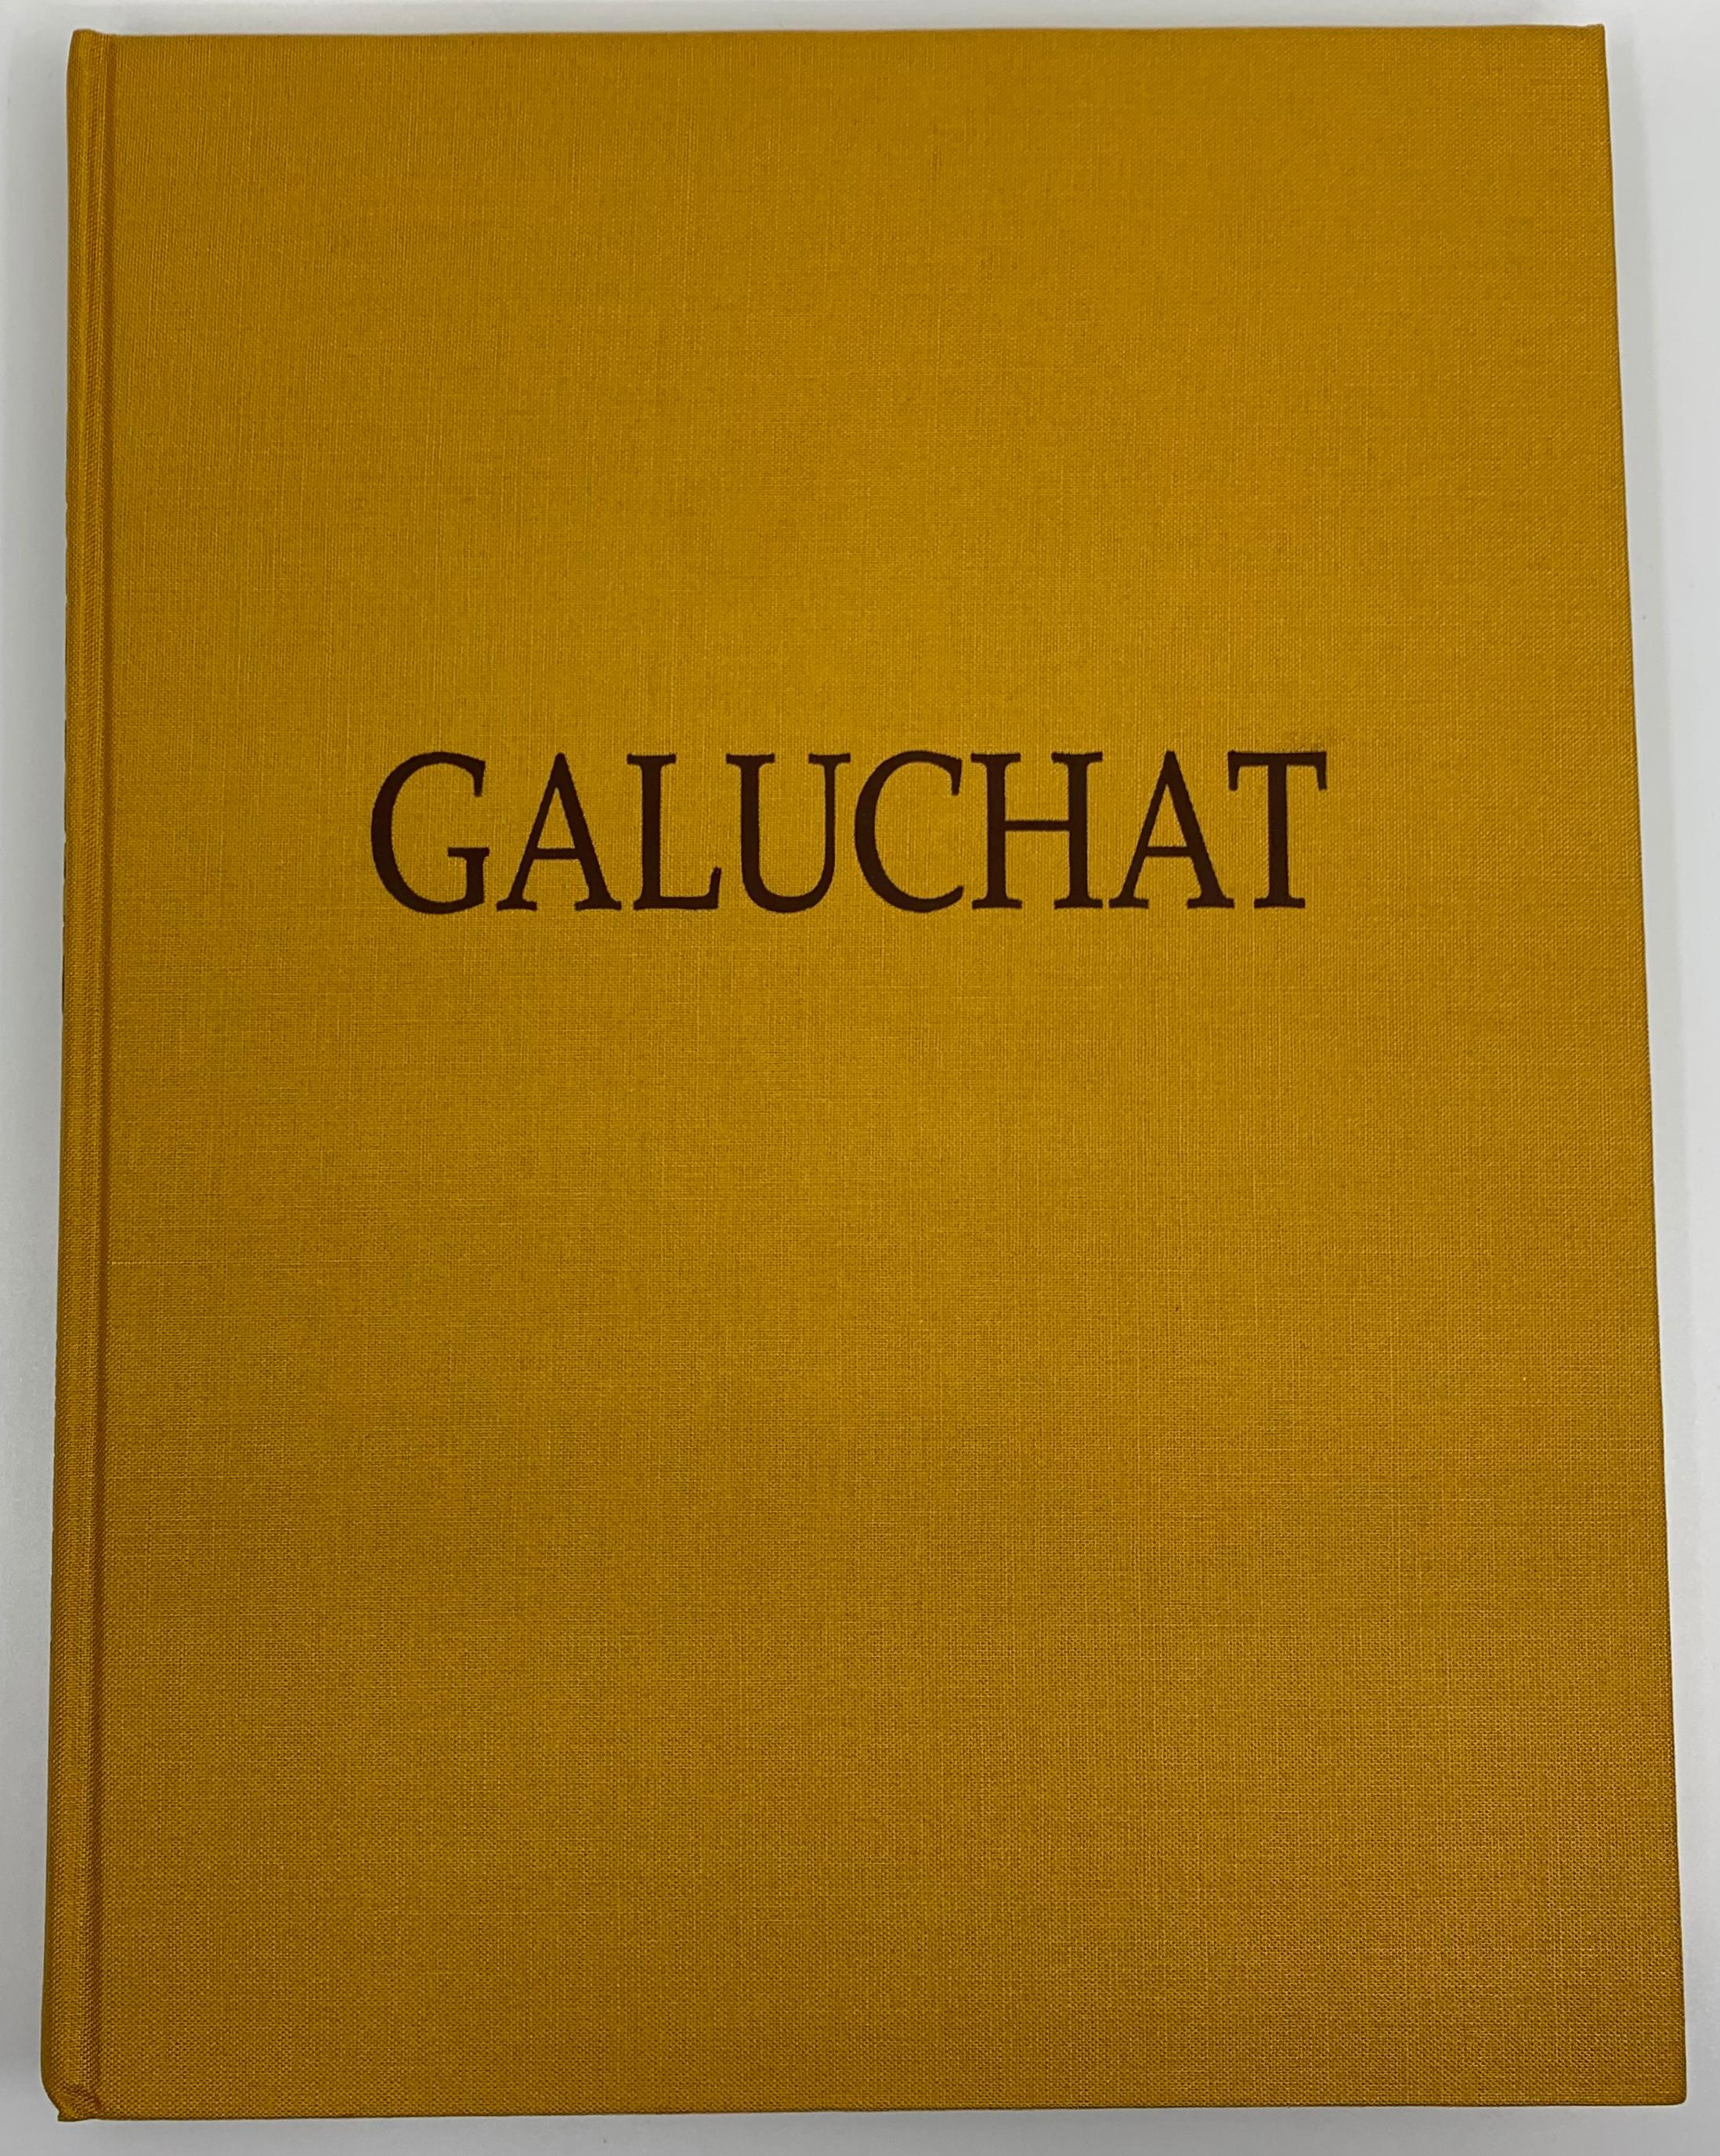 Galuchat, Lison de Caunes & Jean Perfettini, First Edition. An excellent copy in French of the definitive book on shagreen/galuchat with 184 pages illustrated of objects and furniture made from the shark or ray skin; made very popular by designers